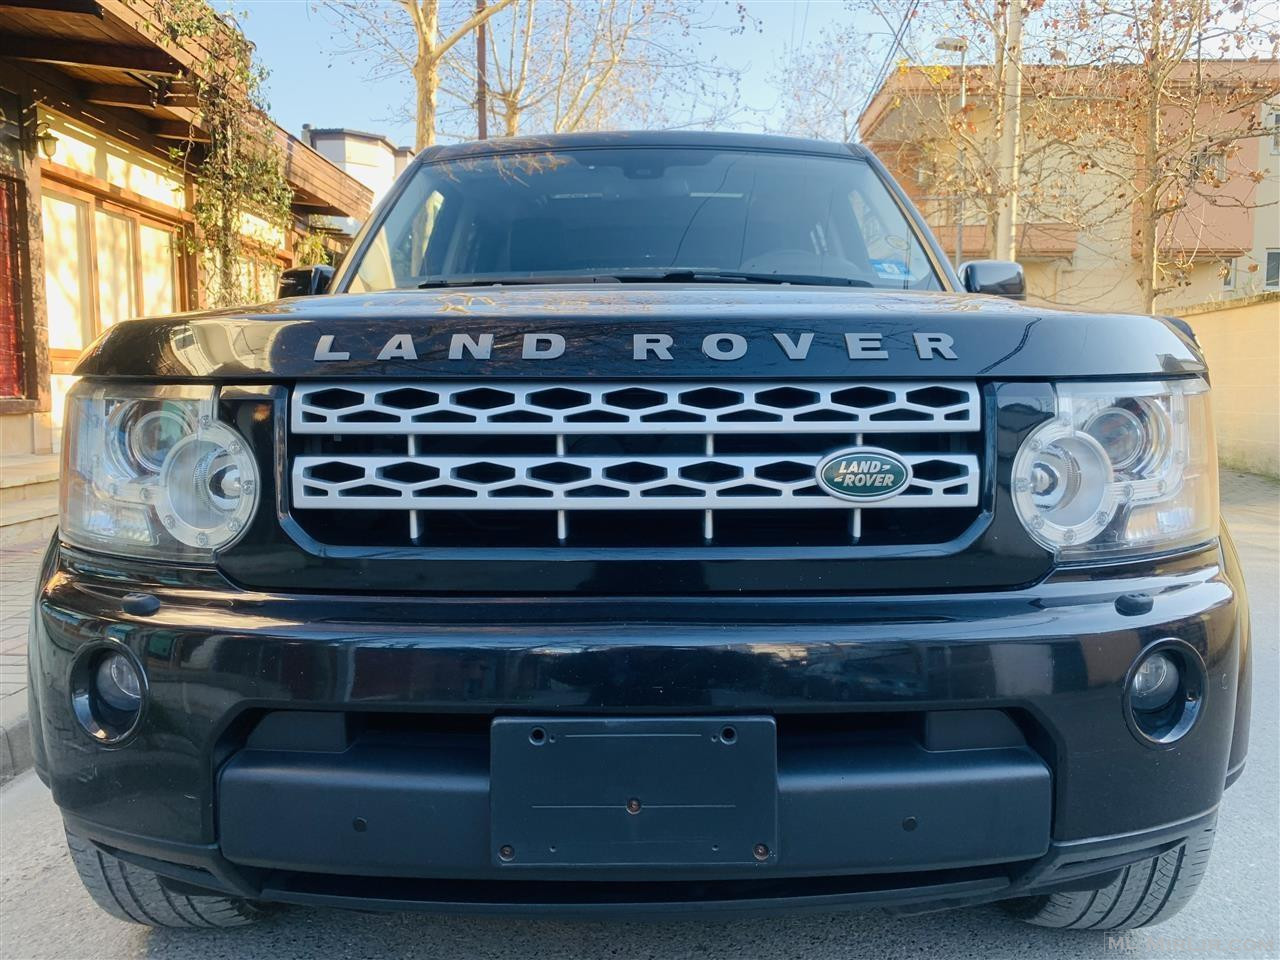 LAND ROVER DISCOVERY 4 -13FULL MUNDESI NDERRIMI